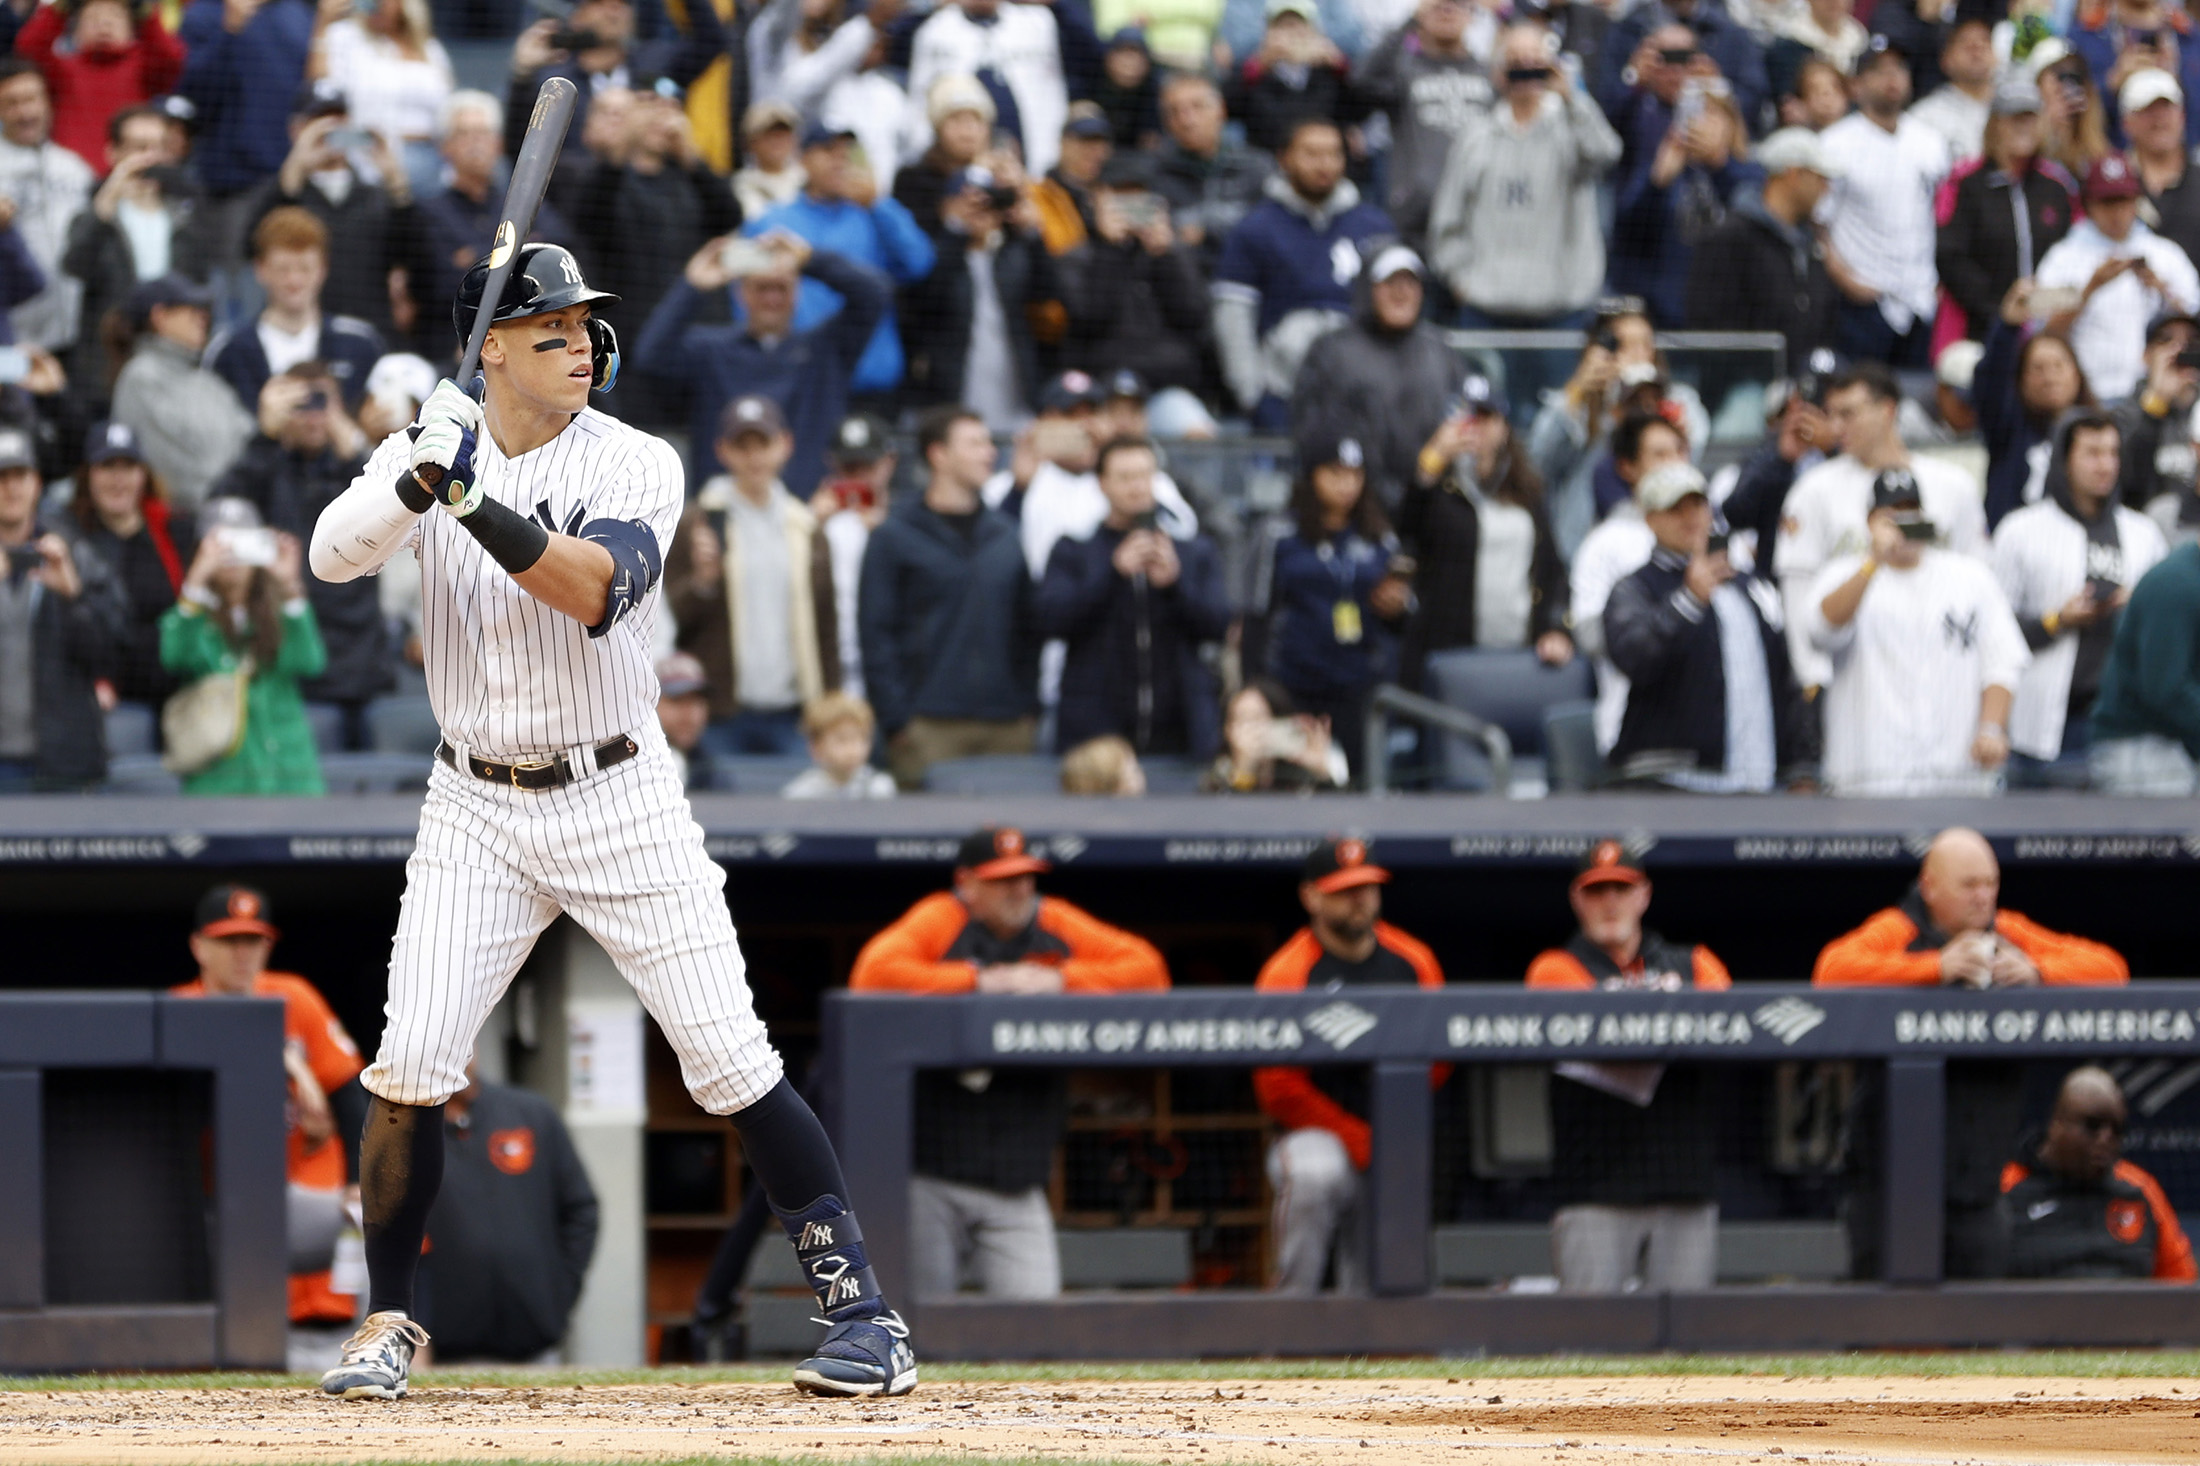 Aaron Judge stays at 61 homers on 61st anniversary of Maris' 61st